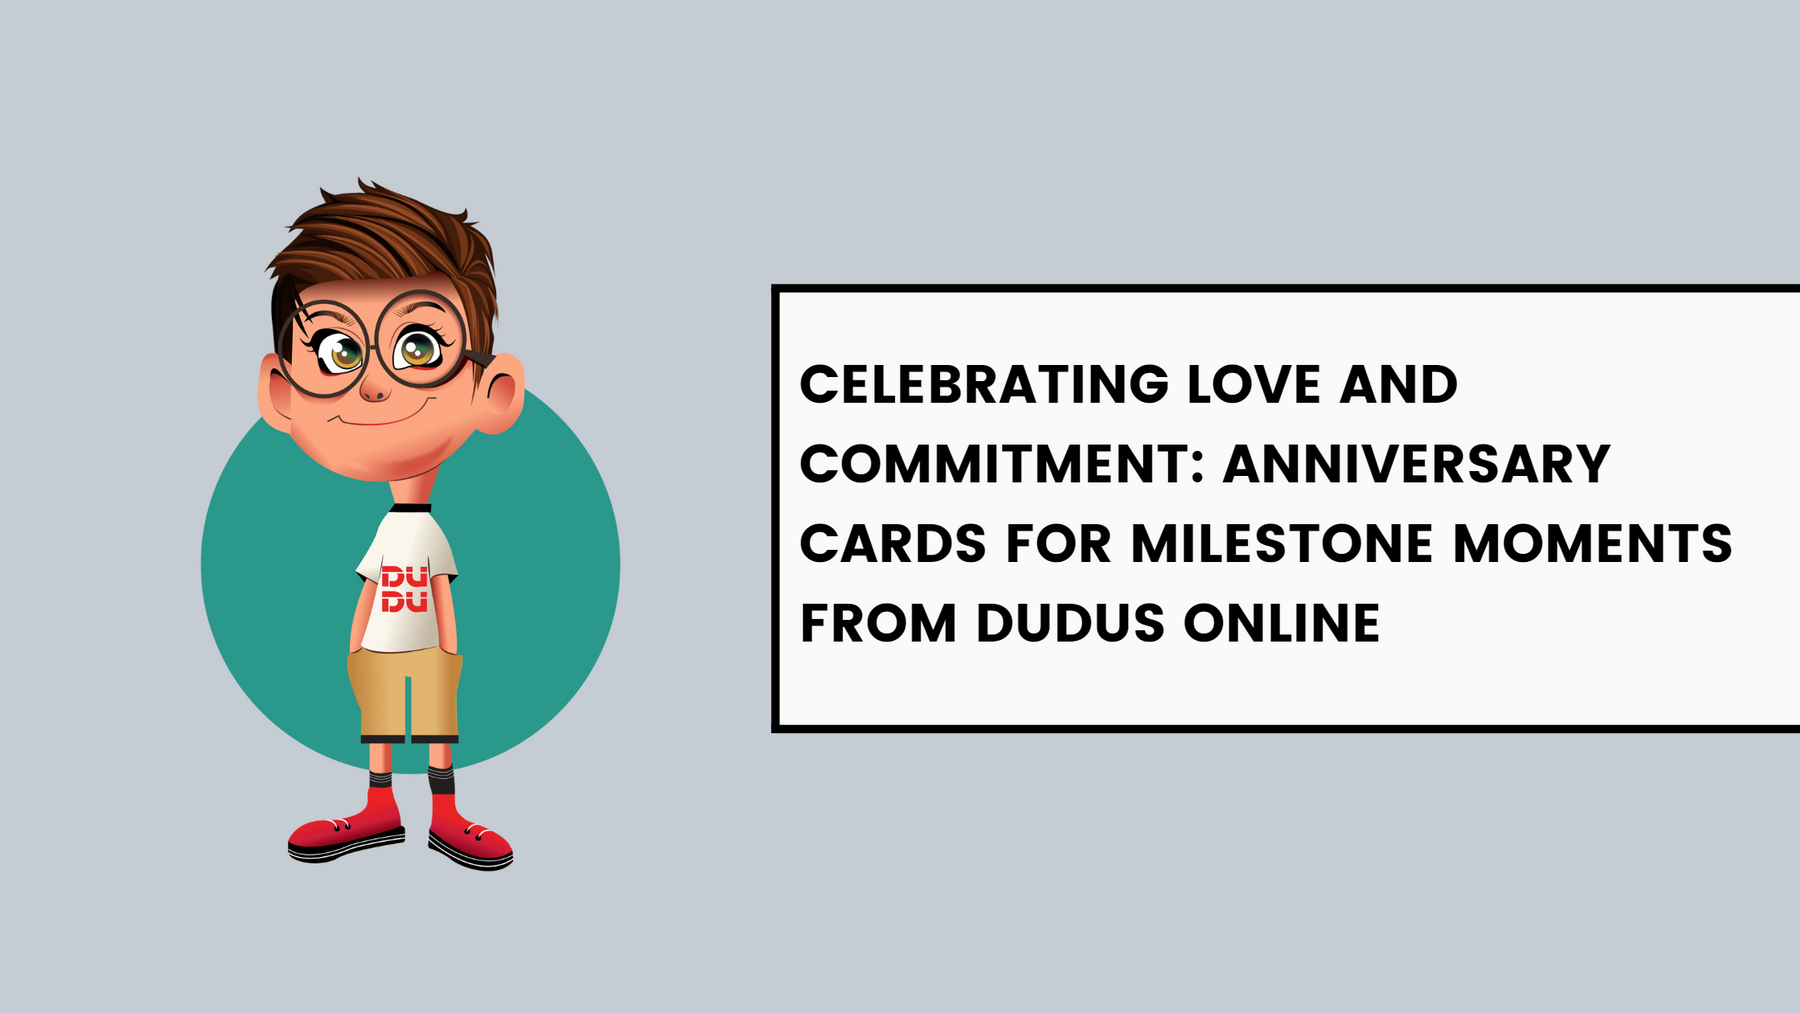 Celebrating Love And Commitment: Anniversary Cards For Milestone Moments From Dudus Online